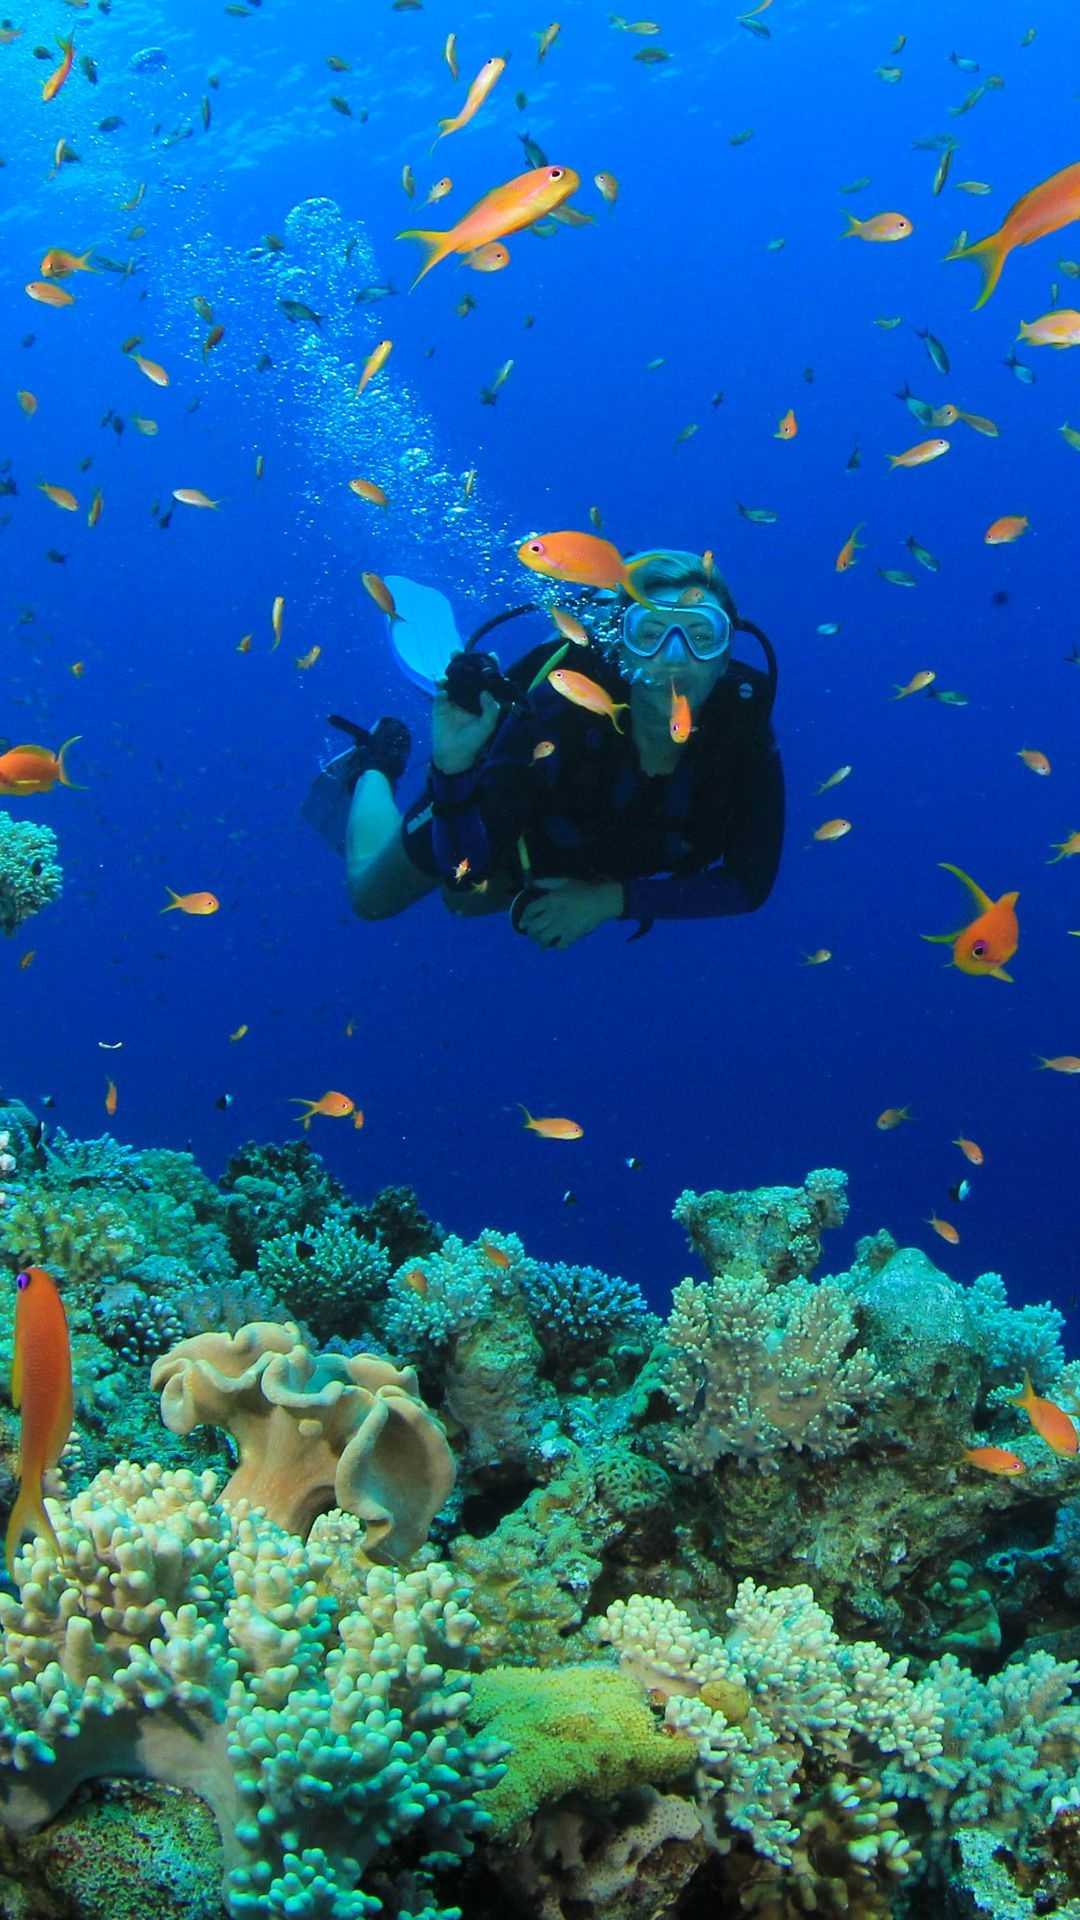 Diving: Scuba diver explores coral reefs, Recreational and scientific underwater activity. 1080x1920 Full HD Background.